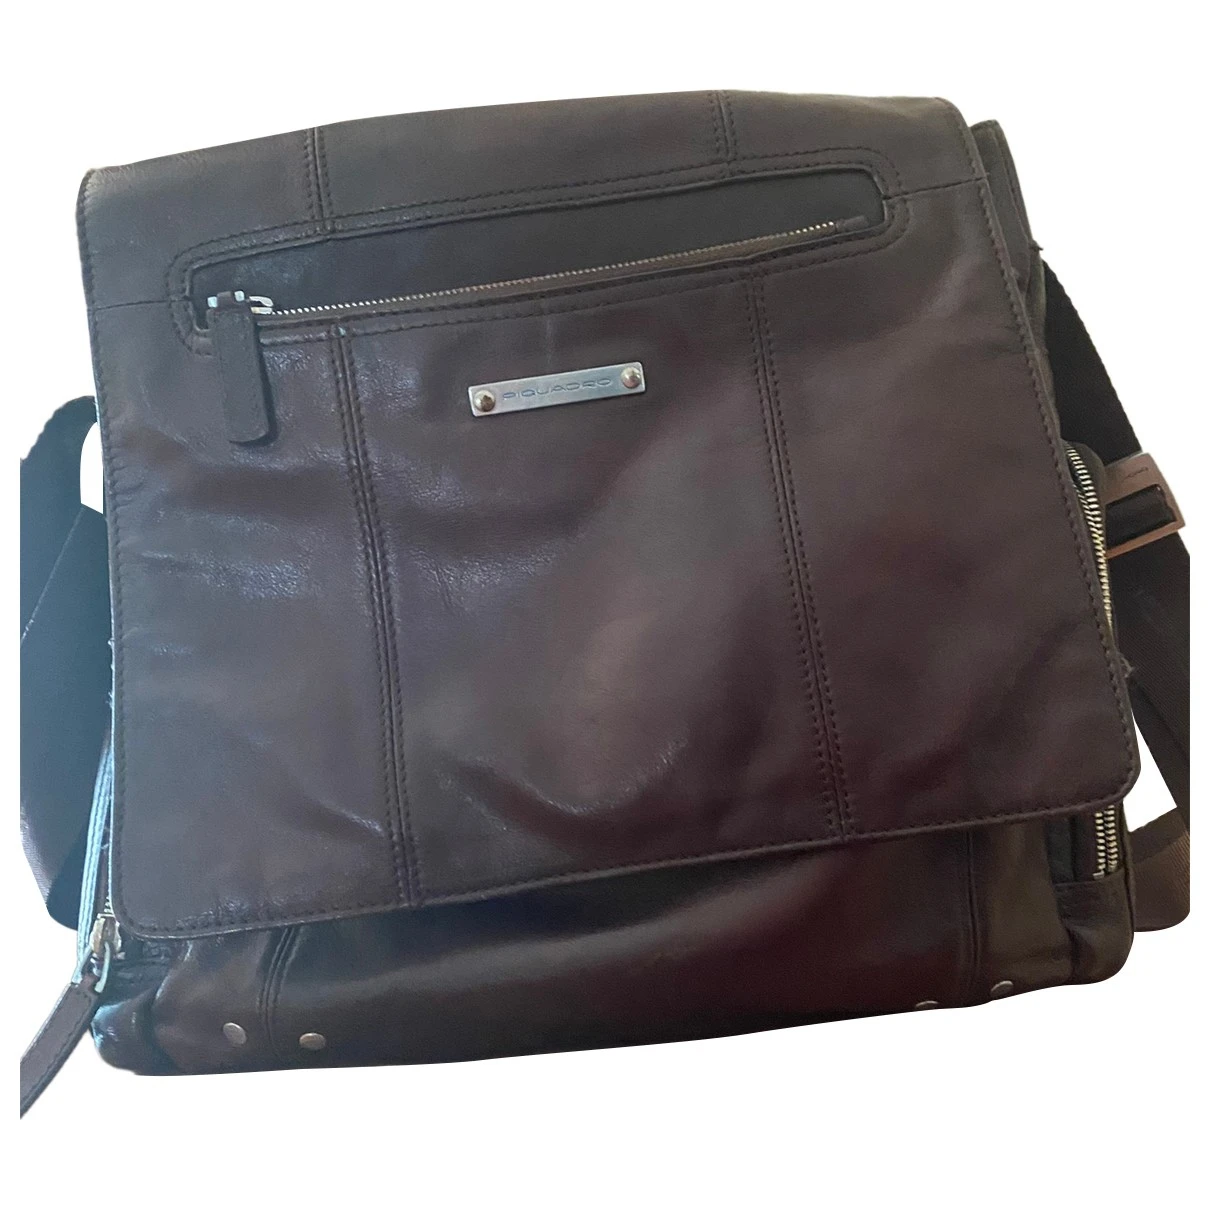 bags Piquadro bags for Male Leather. Used condition